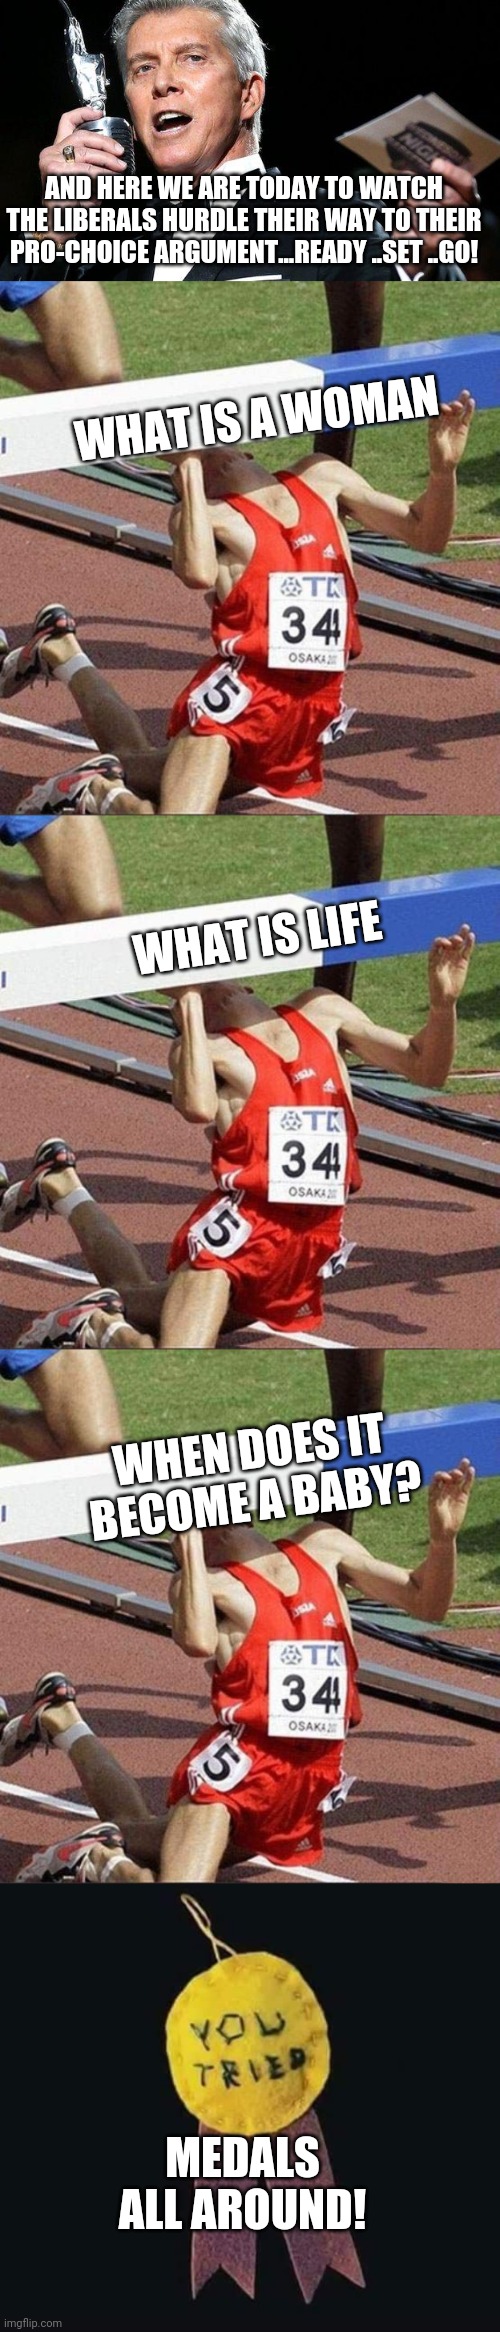 AND HERE WE ARE TODAY TO WATCH THE LIBERALS HURDLE THEIR WAY TO THEIR PRO-CHOICE ARGUMENT...READY ..SET ..GO! WHAT IS A WOMAN; WHAT IS LIFE; WHEN DOES IT BECOME A BABY? MEDALS ALL AROUND! | image tagged in lets get ready to rumble,hurdle,participation ribbon | made w/ Imgflip meme maker